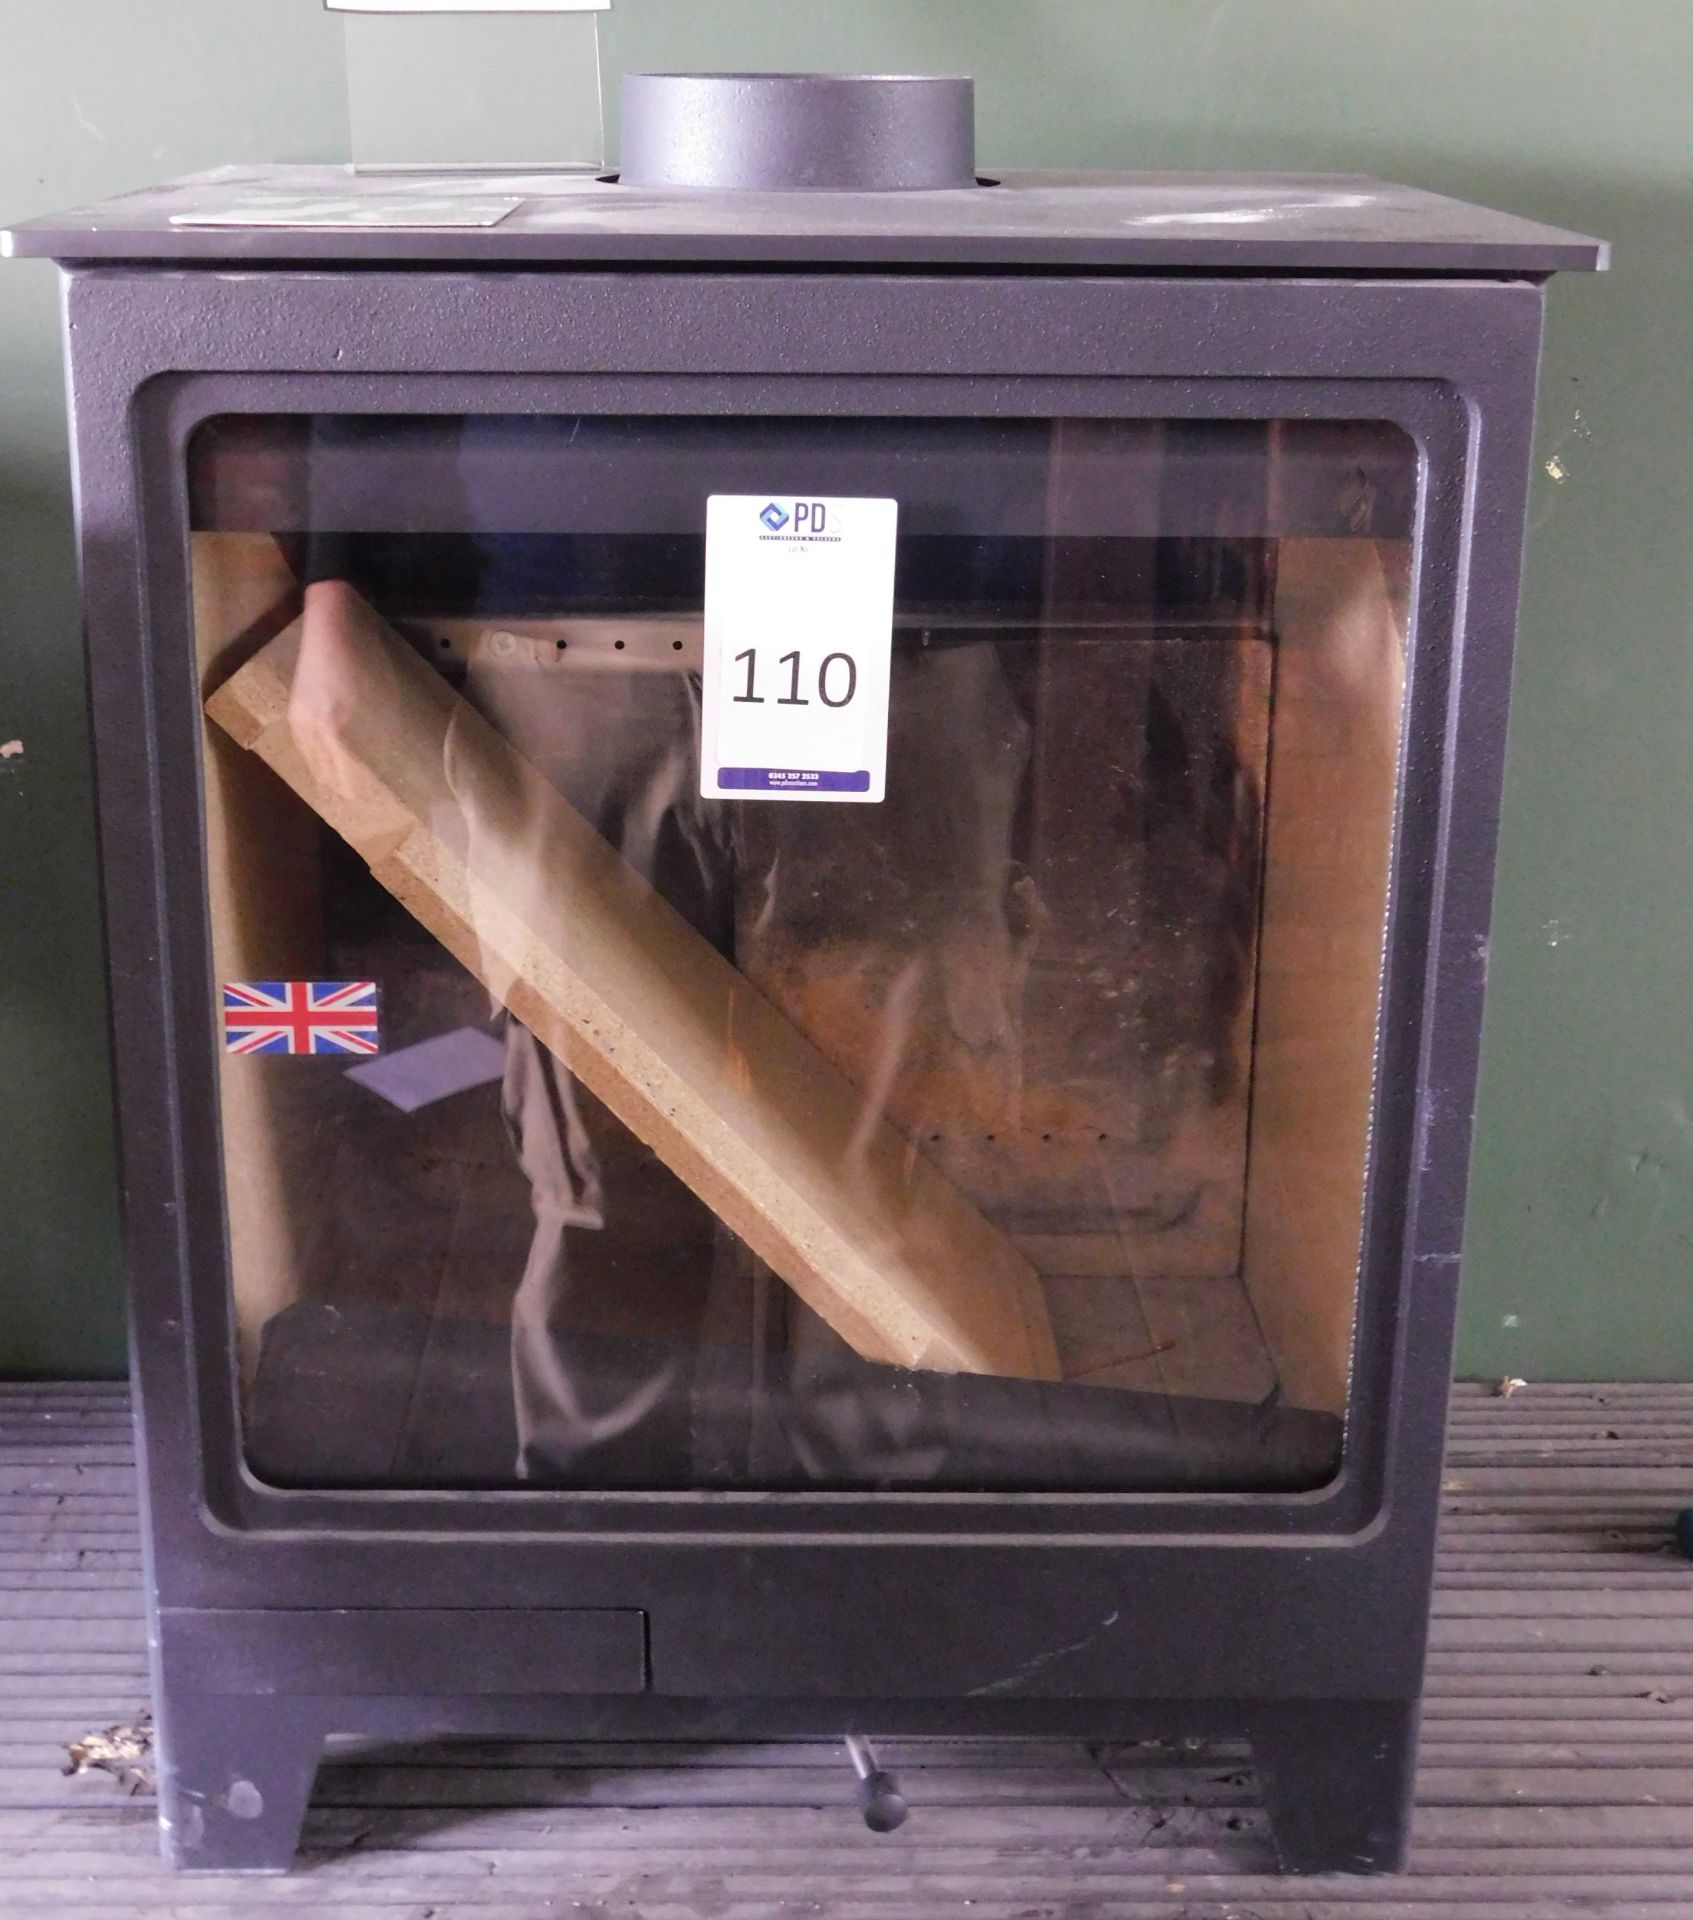 Ex-Display “Allure 5” Woodburning Stove (Where the company’s description/price information is